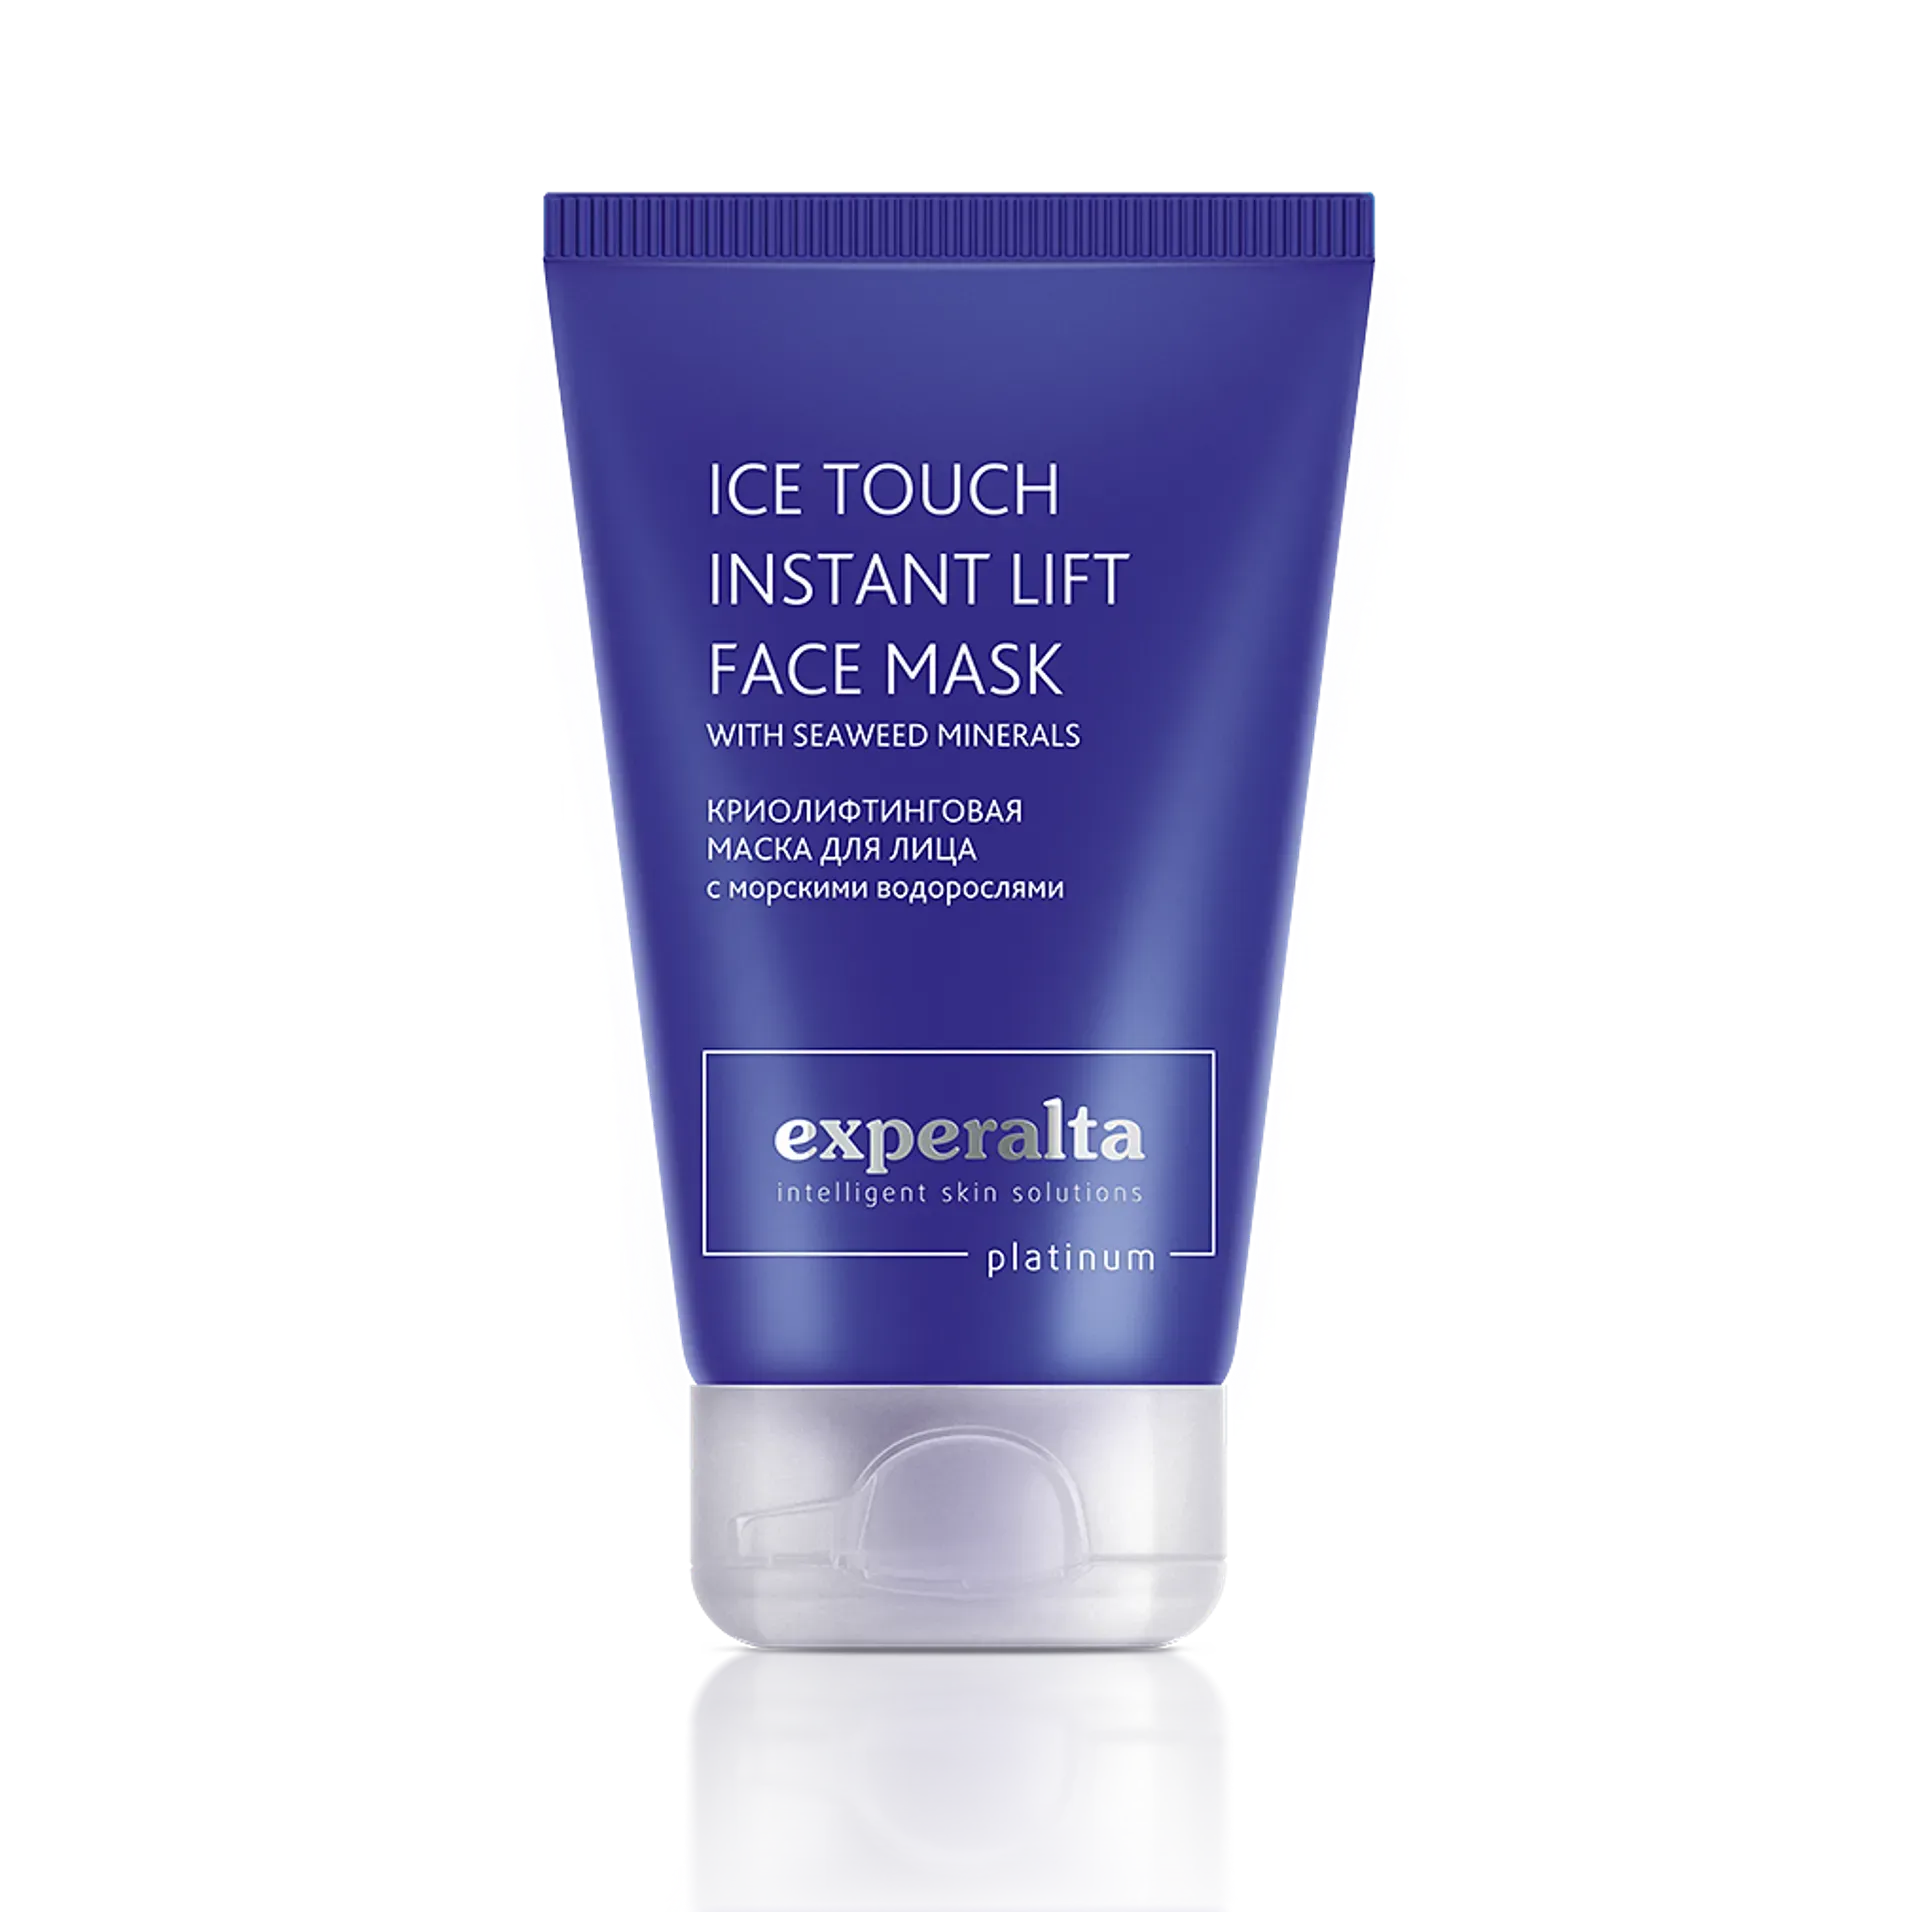 Experalta Platinum - Ice Touch Instant Lift Mask